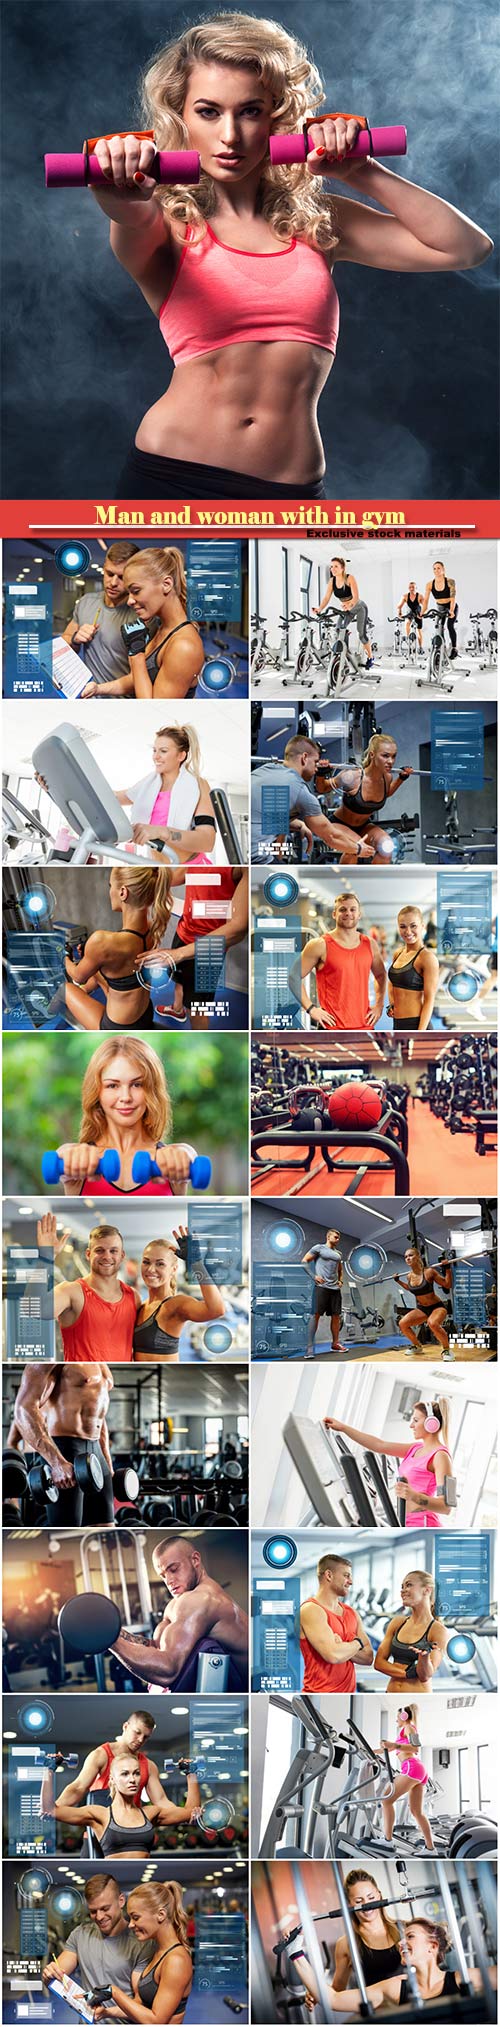 Sport activities, man and woman with in gym